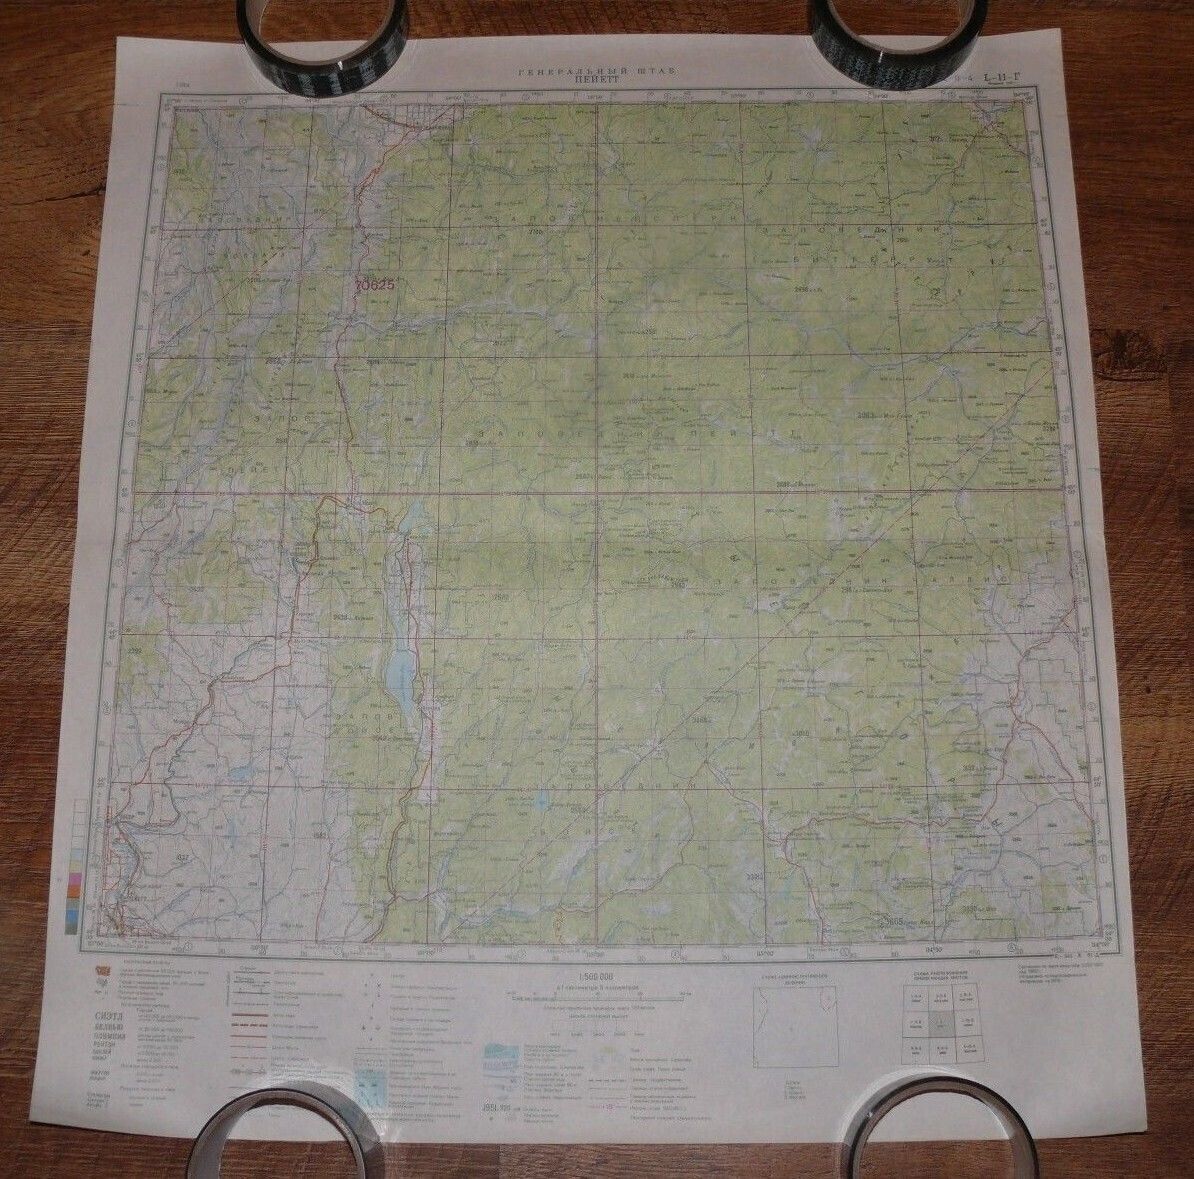 Authentic Soviet TOP SECRET Military Topographic Map Payette, Idaho USA #79